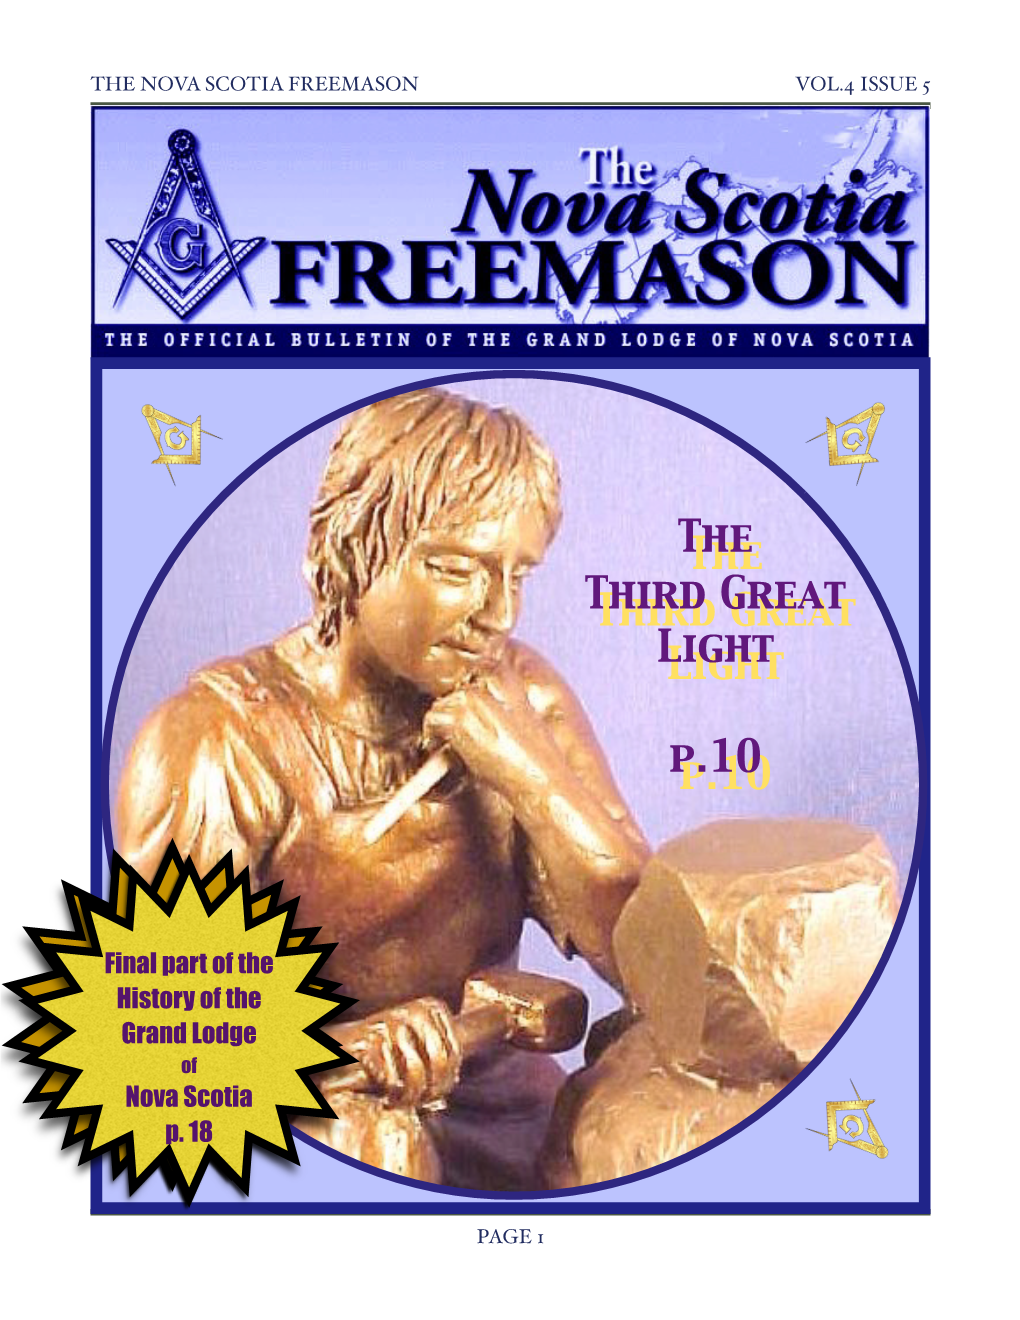 Freemason Vol4 Issue5.Pages